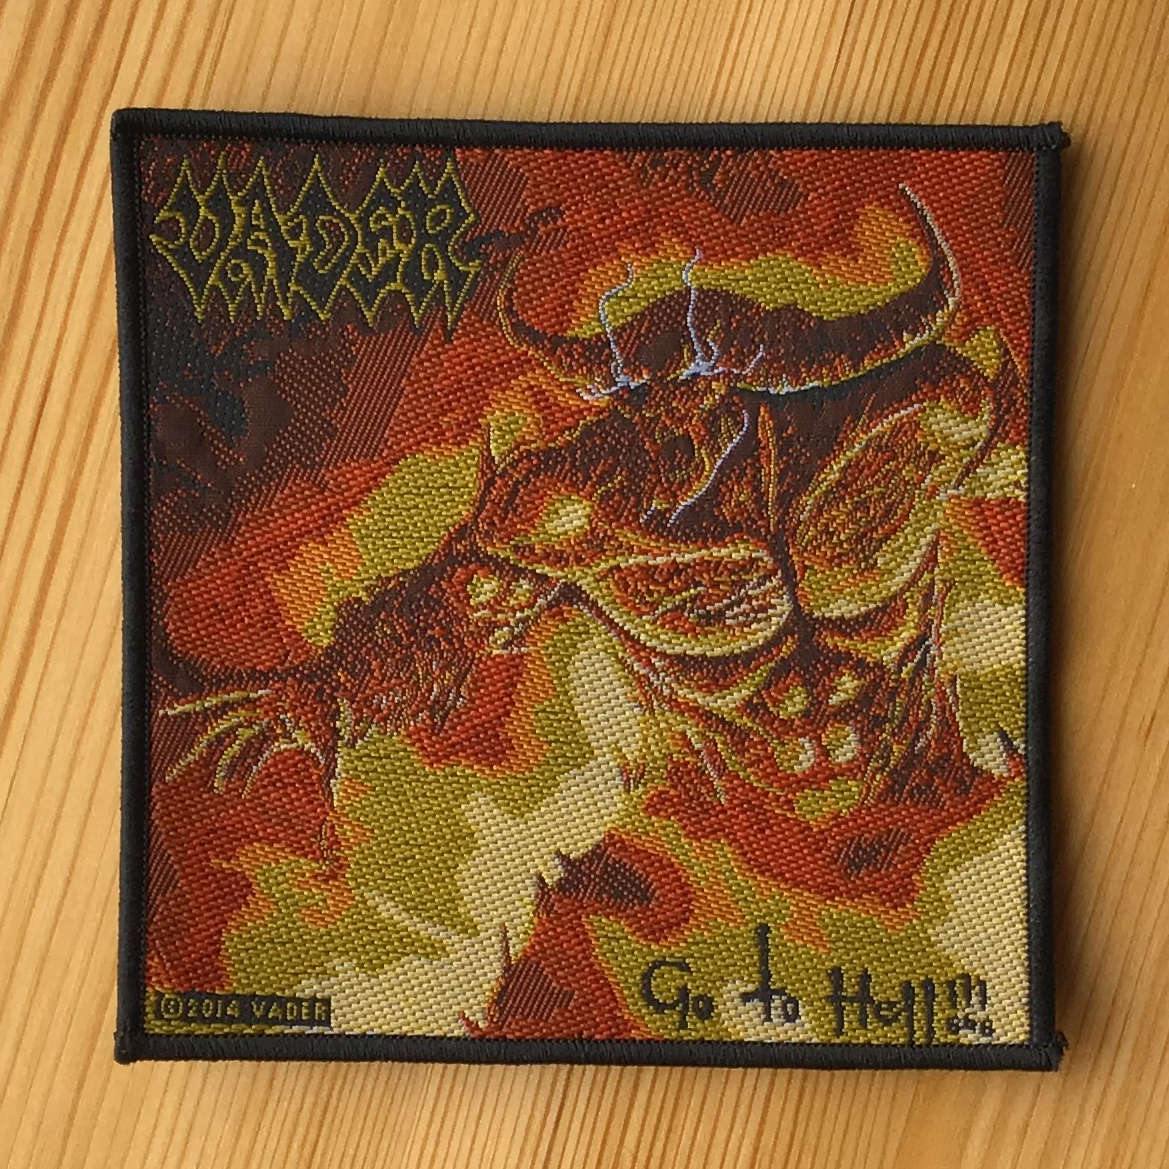 Vader - Go to Hell (Woven Patch)